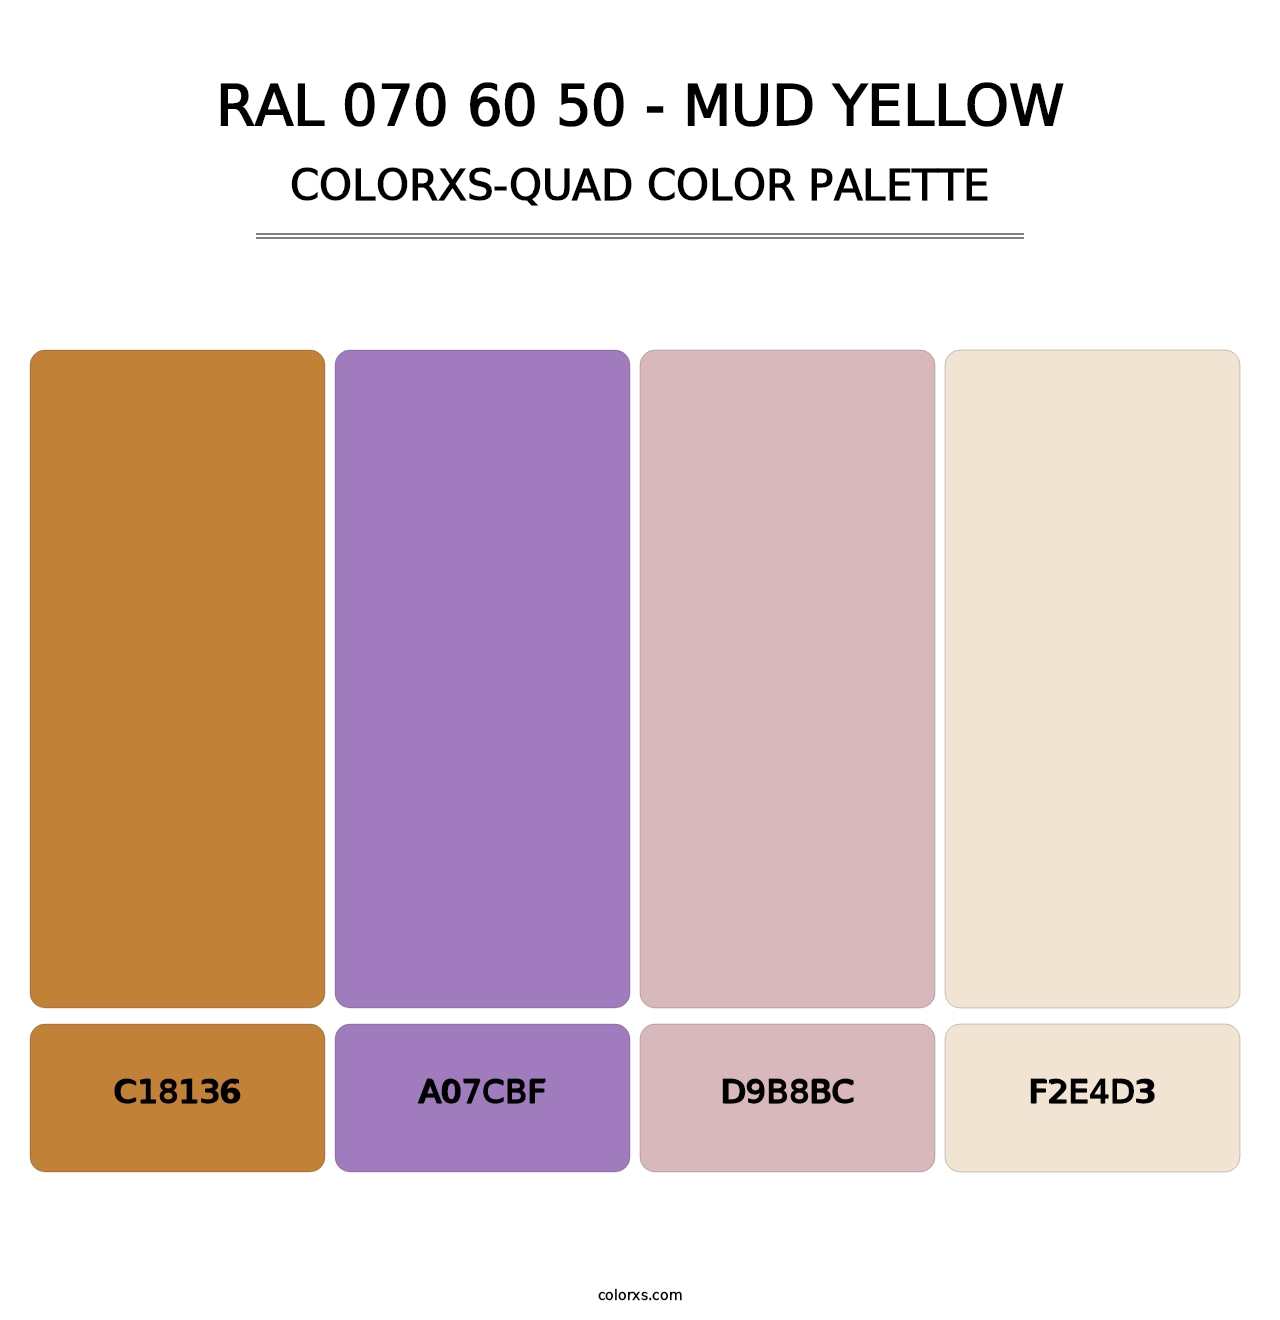 RAL 070 60 50 - Mud Yellow - Colorxs Quad Palette